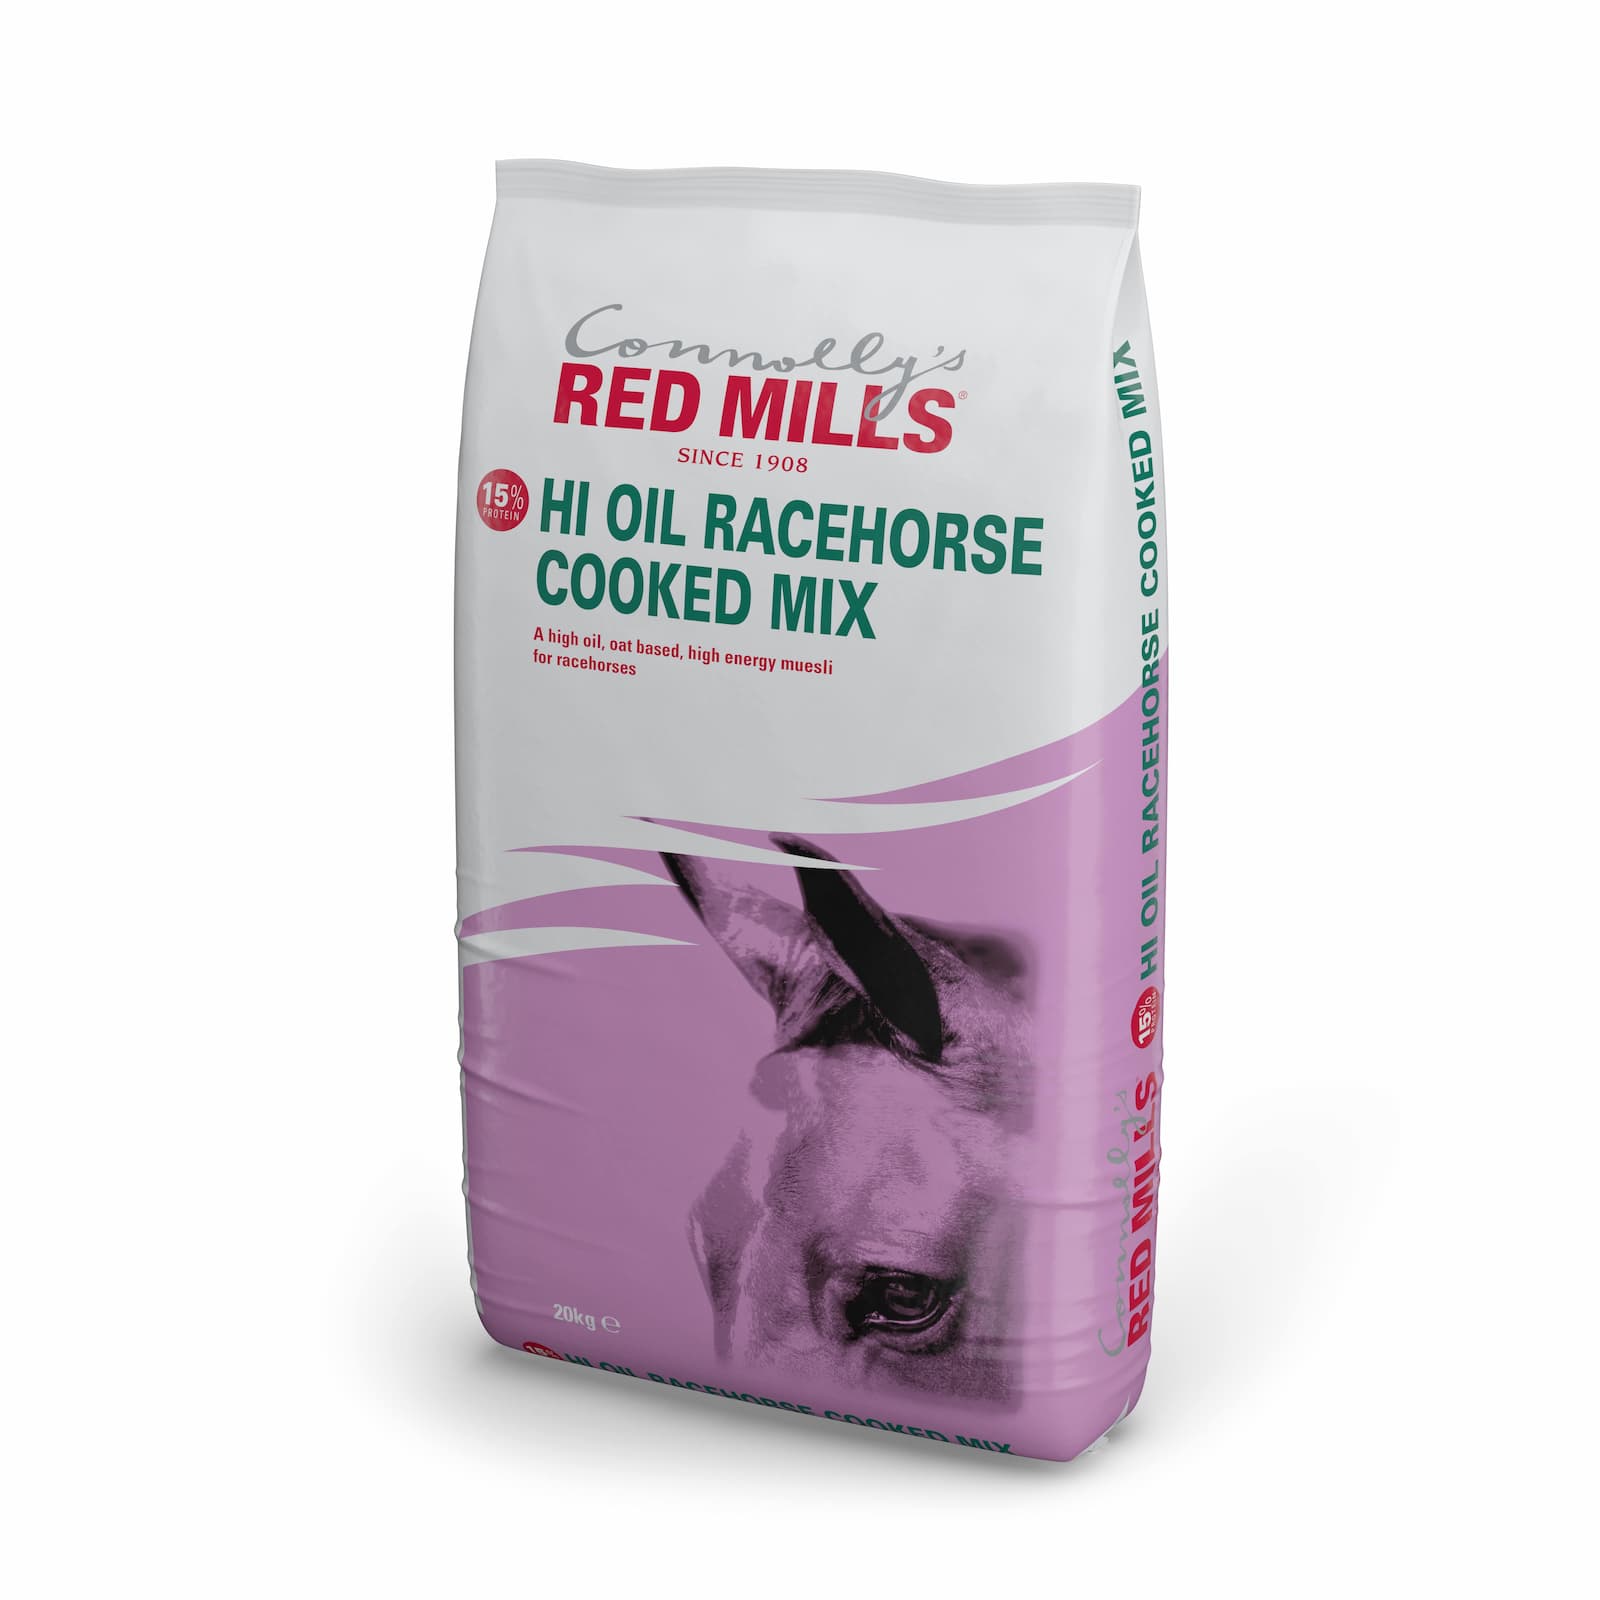 15% Hi Oil Racehorse Cooked Mix